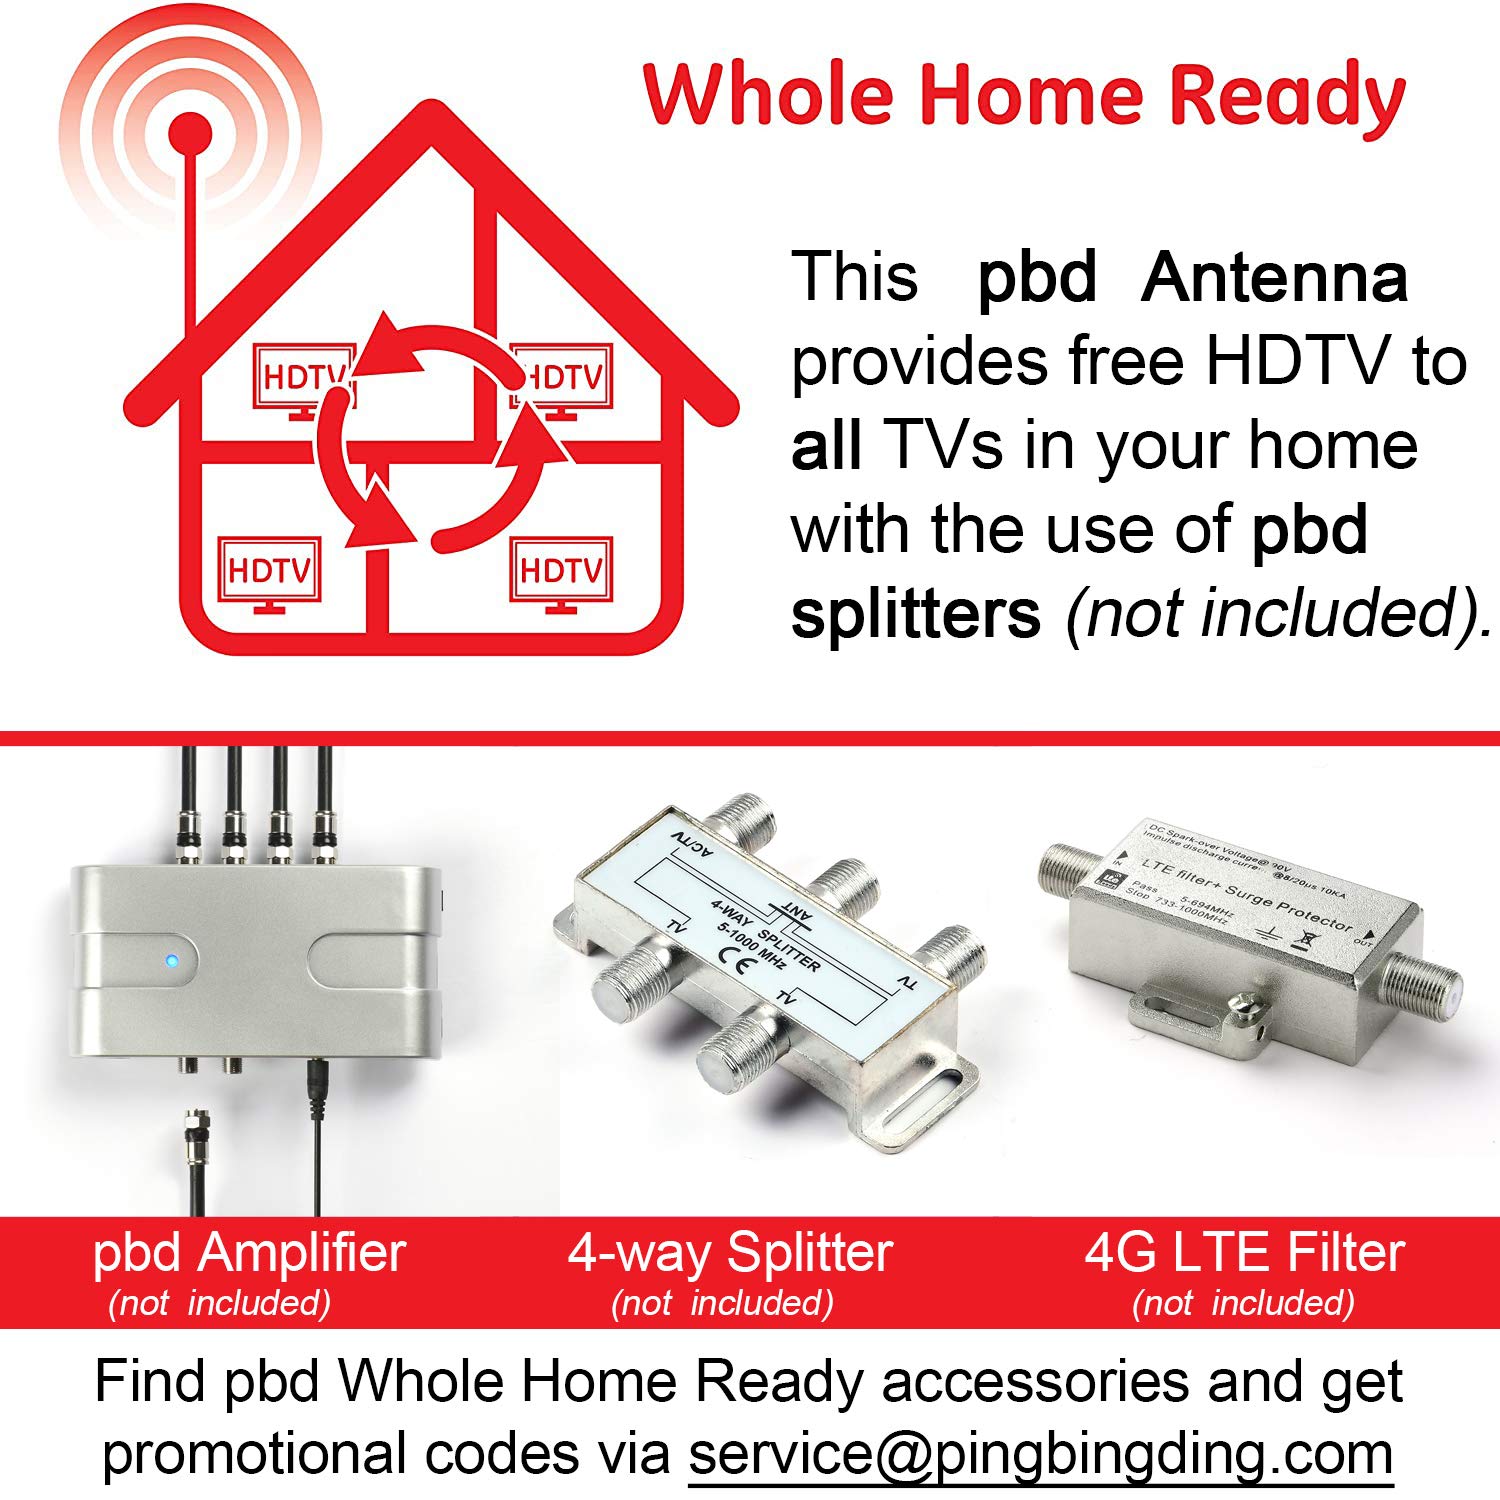 PBD Outdoor Digital HDTV Antenna with High Gain and Low Noise Amplifier, 40FT RG6 Coaxial Cable, 2 Way Splitter, 150 Miles Range, UHF and VHF, Easy Installation - Upgraded Version